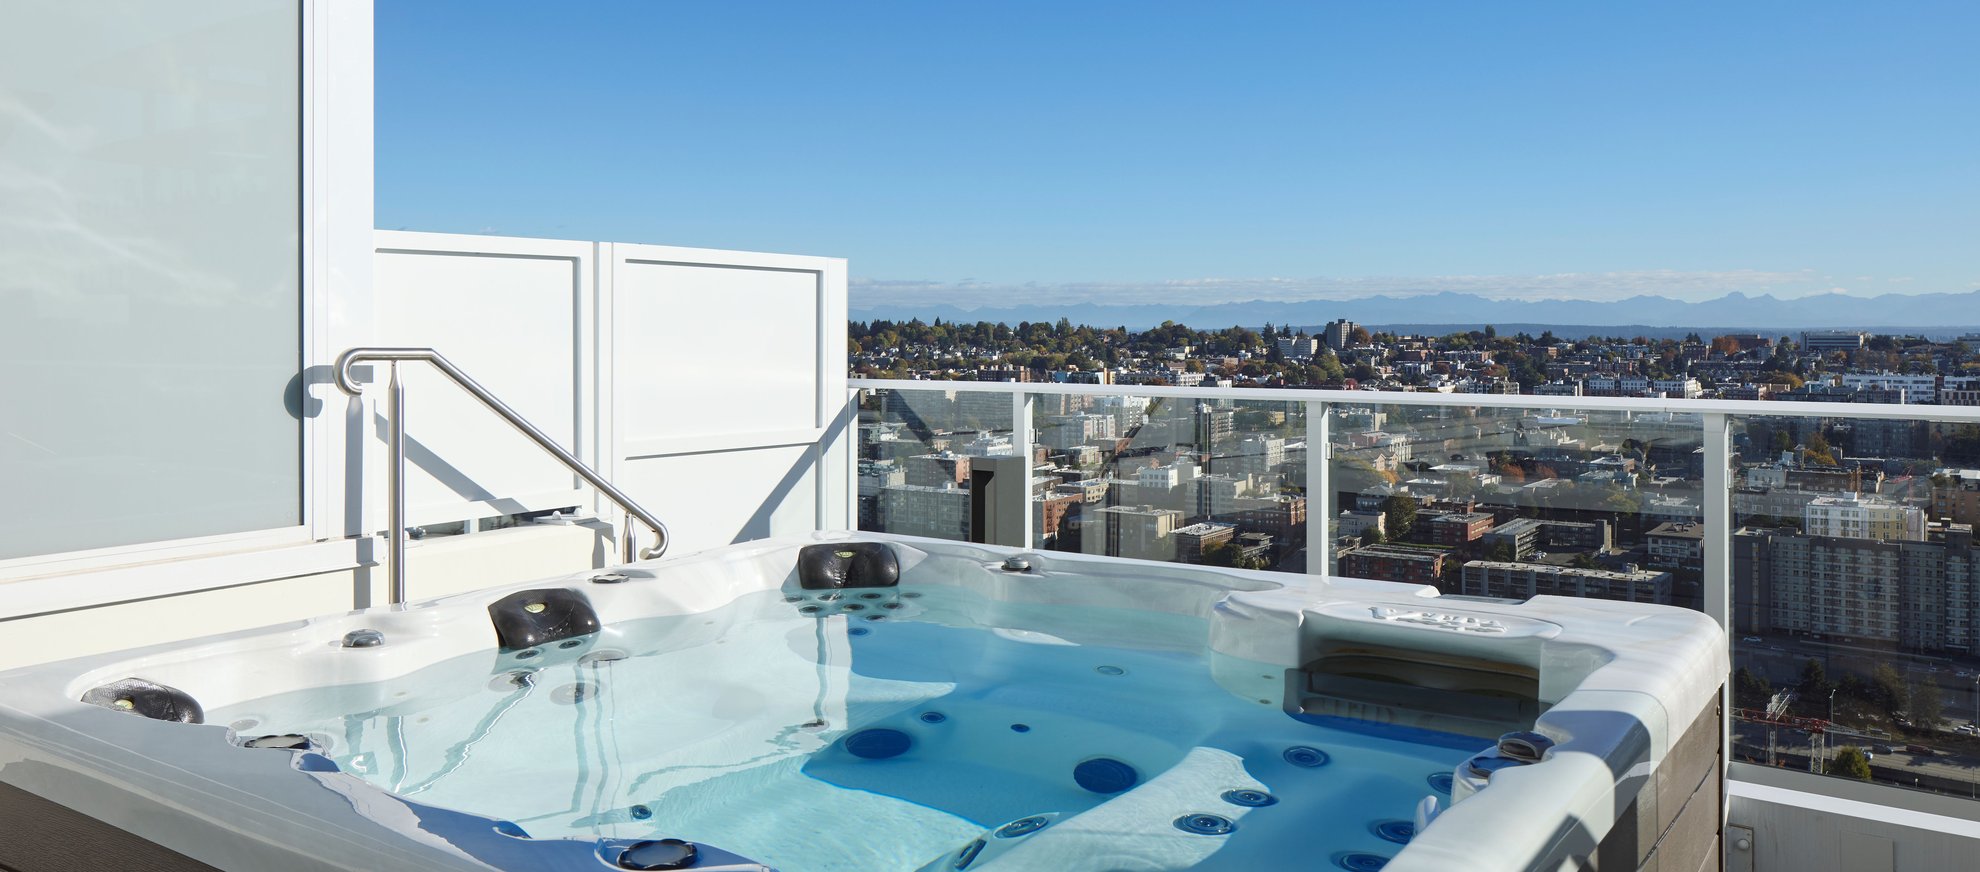 large outdoor hot tub at level seattle penthouse with unhindered seattle city view.jpg